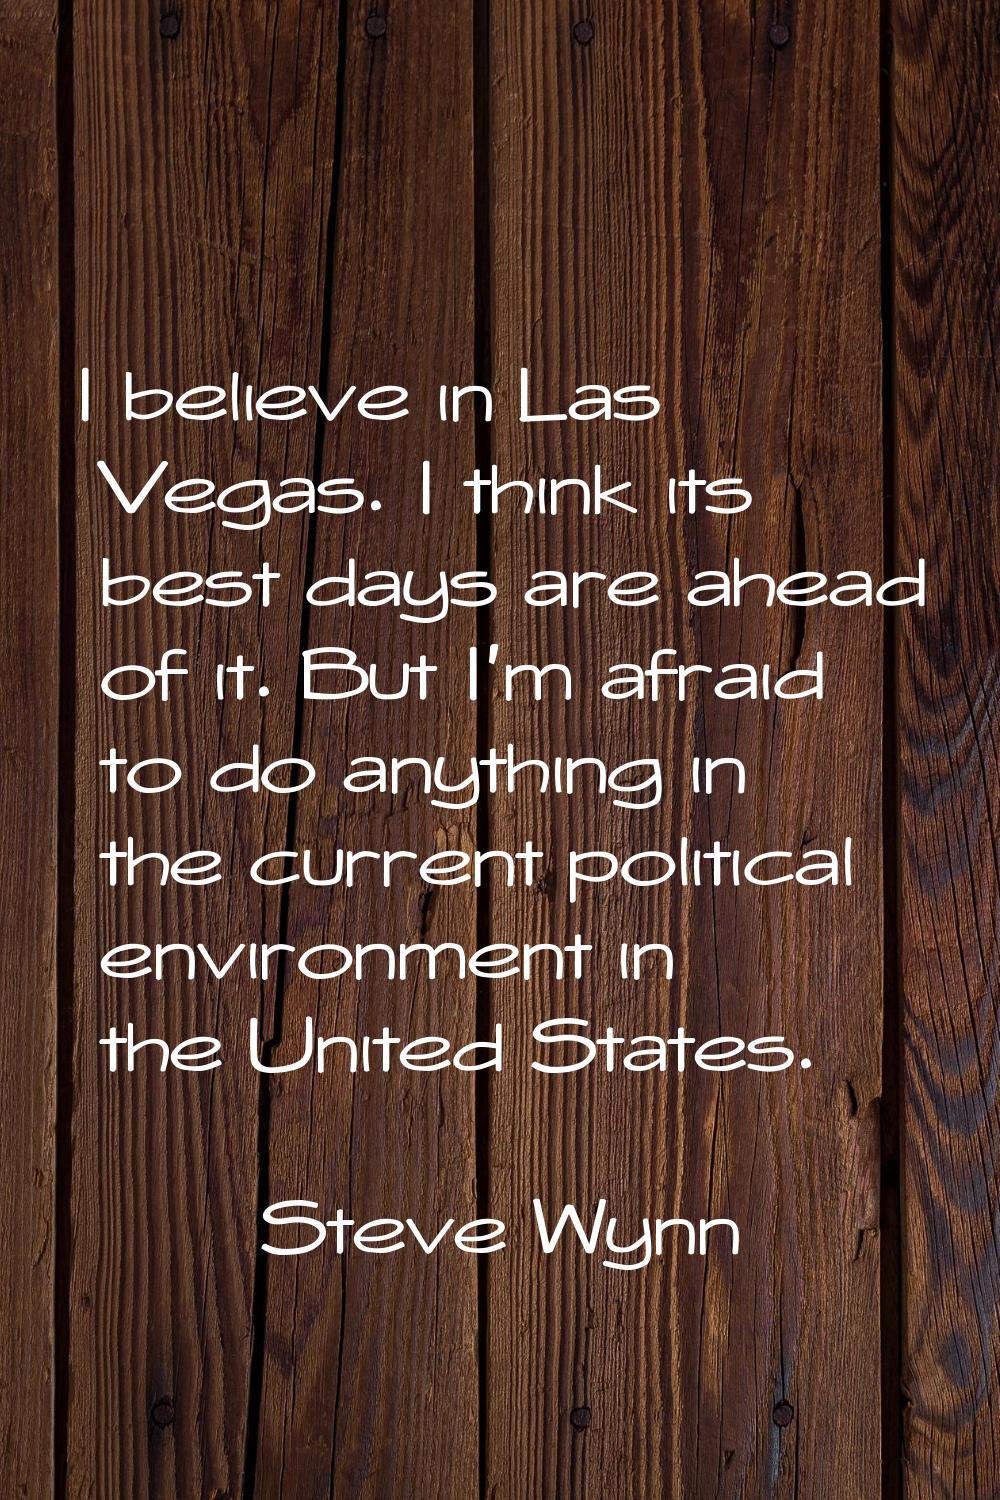 I believe in Las Vegas. I think its best days are ahead of it. But I'm afraid to do anything in the